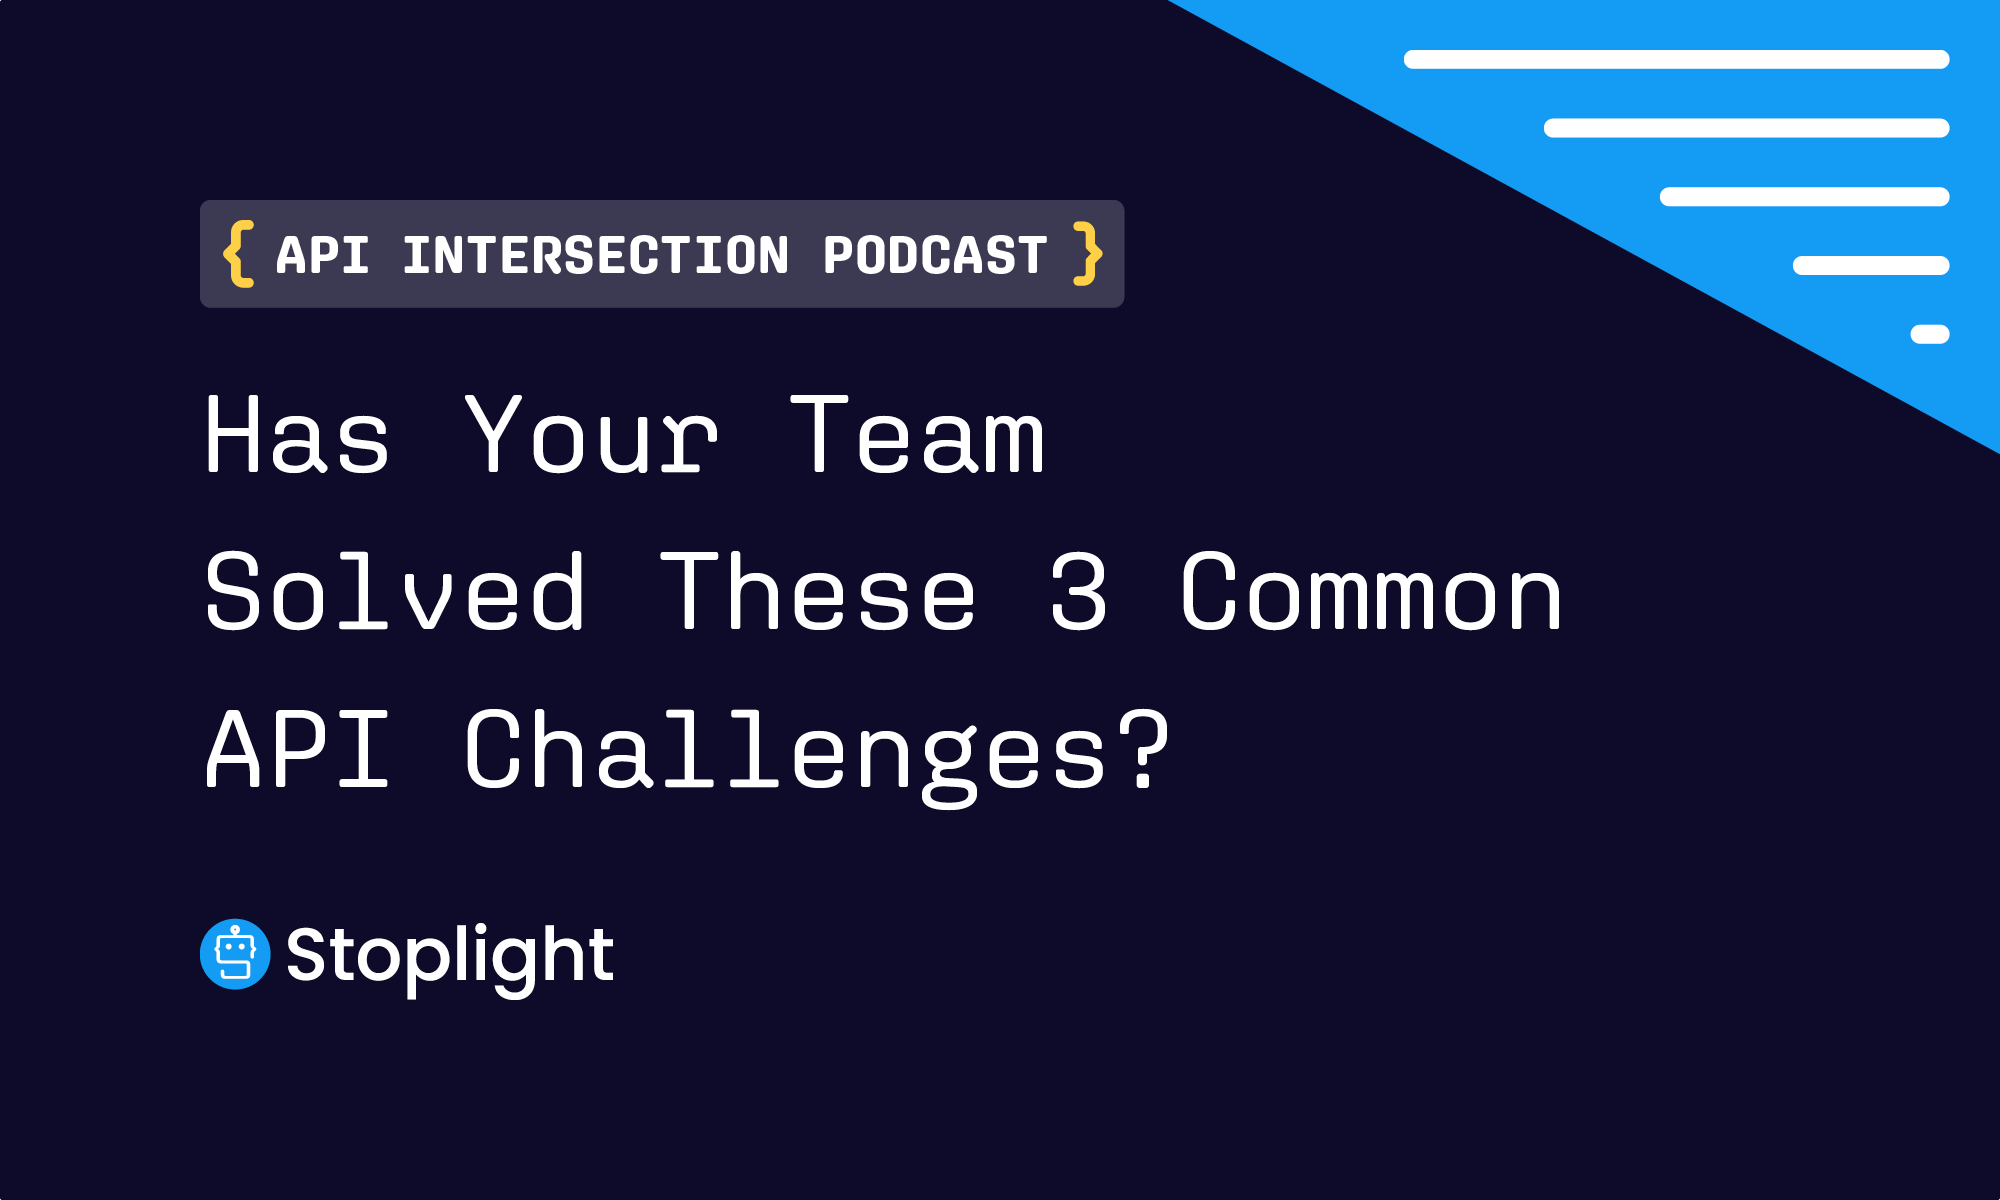 Has Your Team Solved These 3 Common API Challenges?